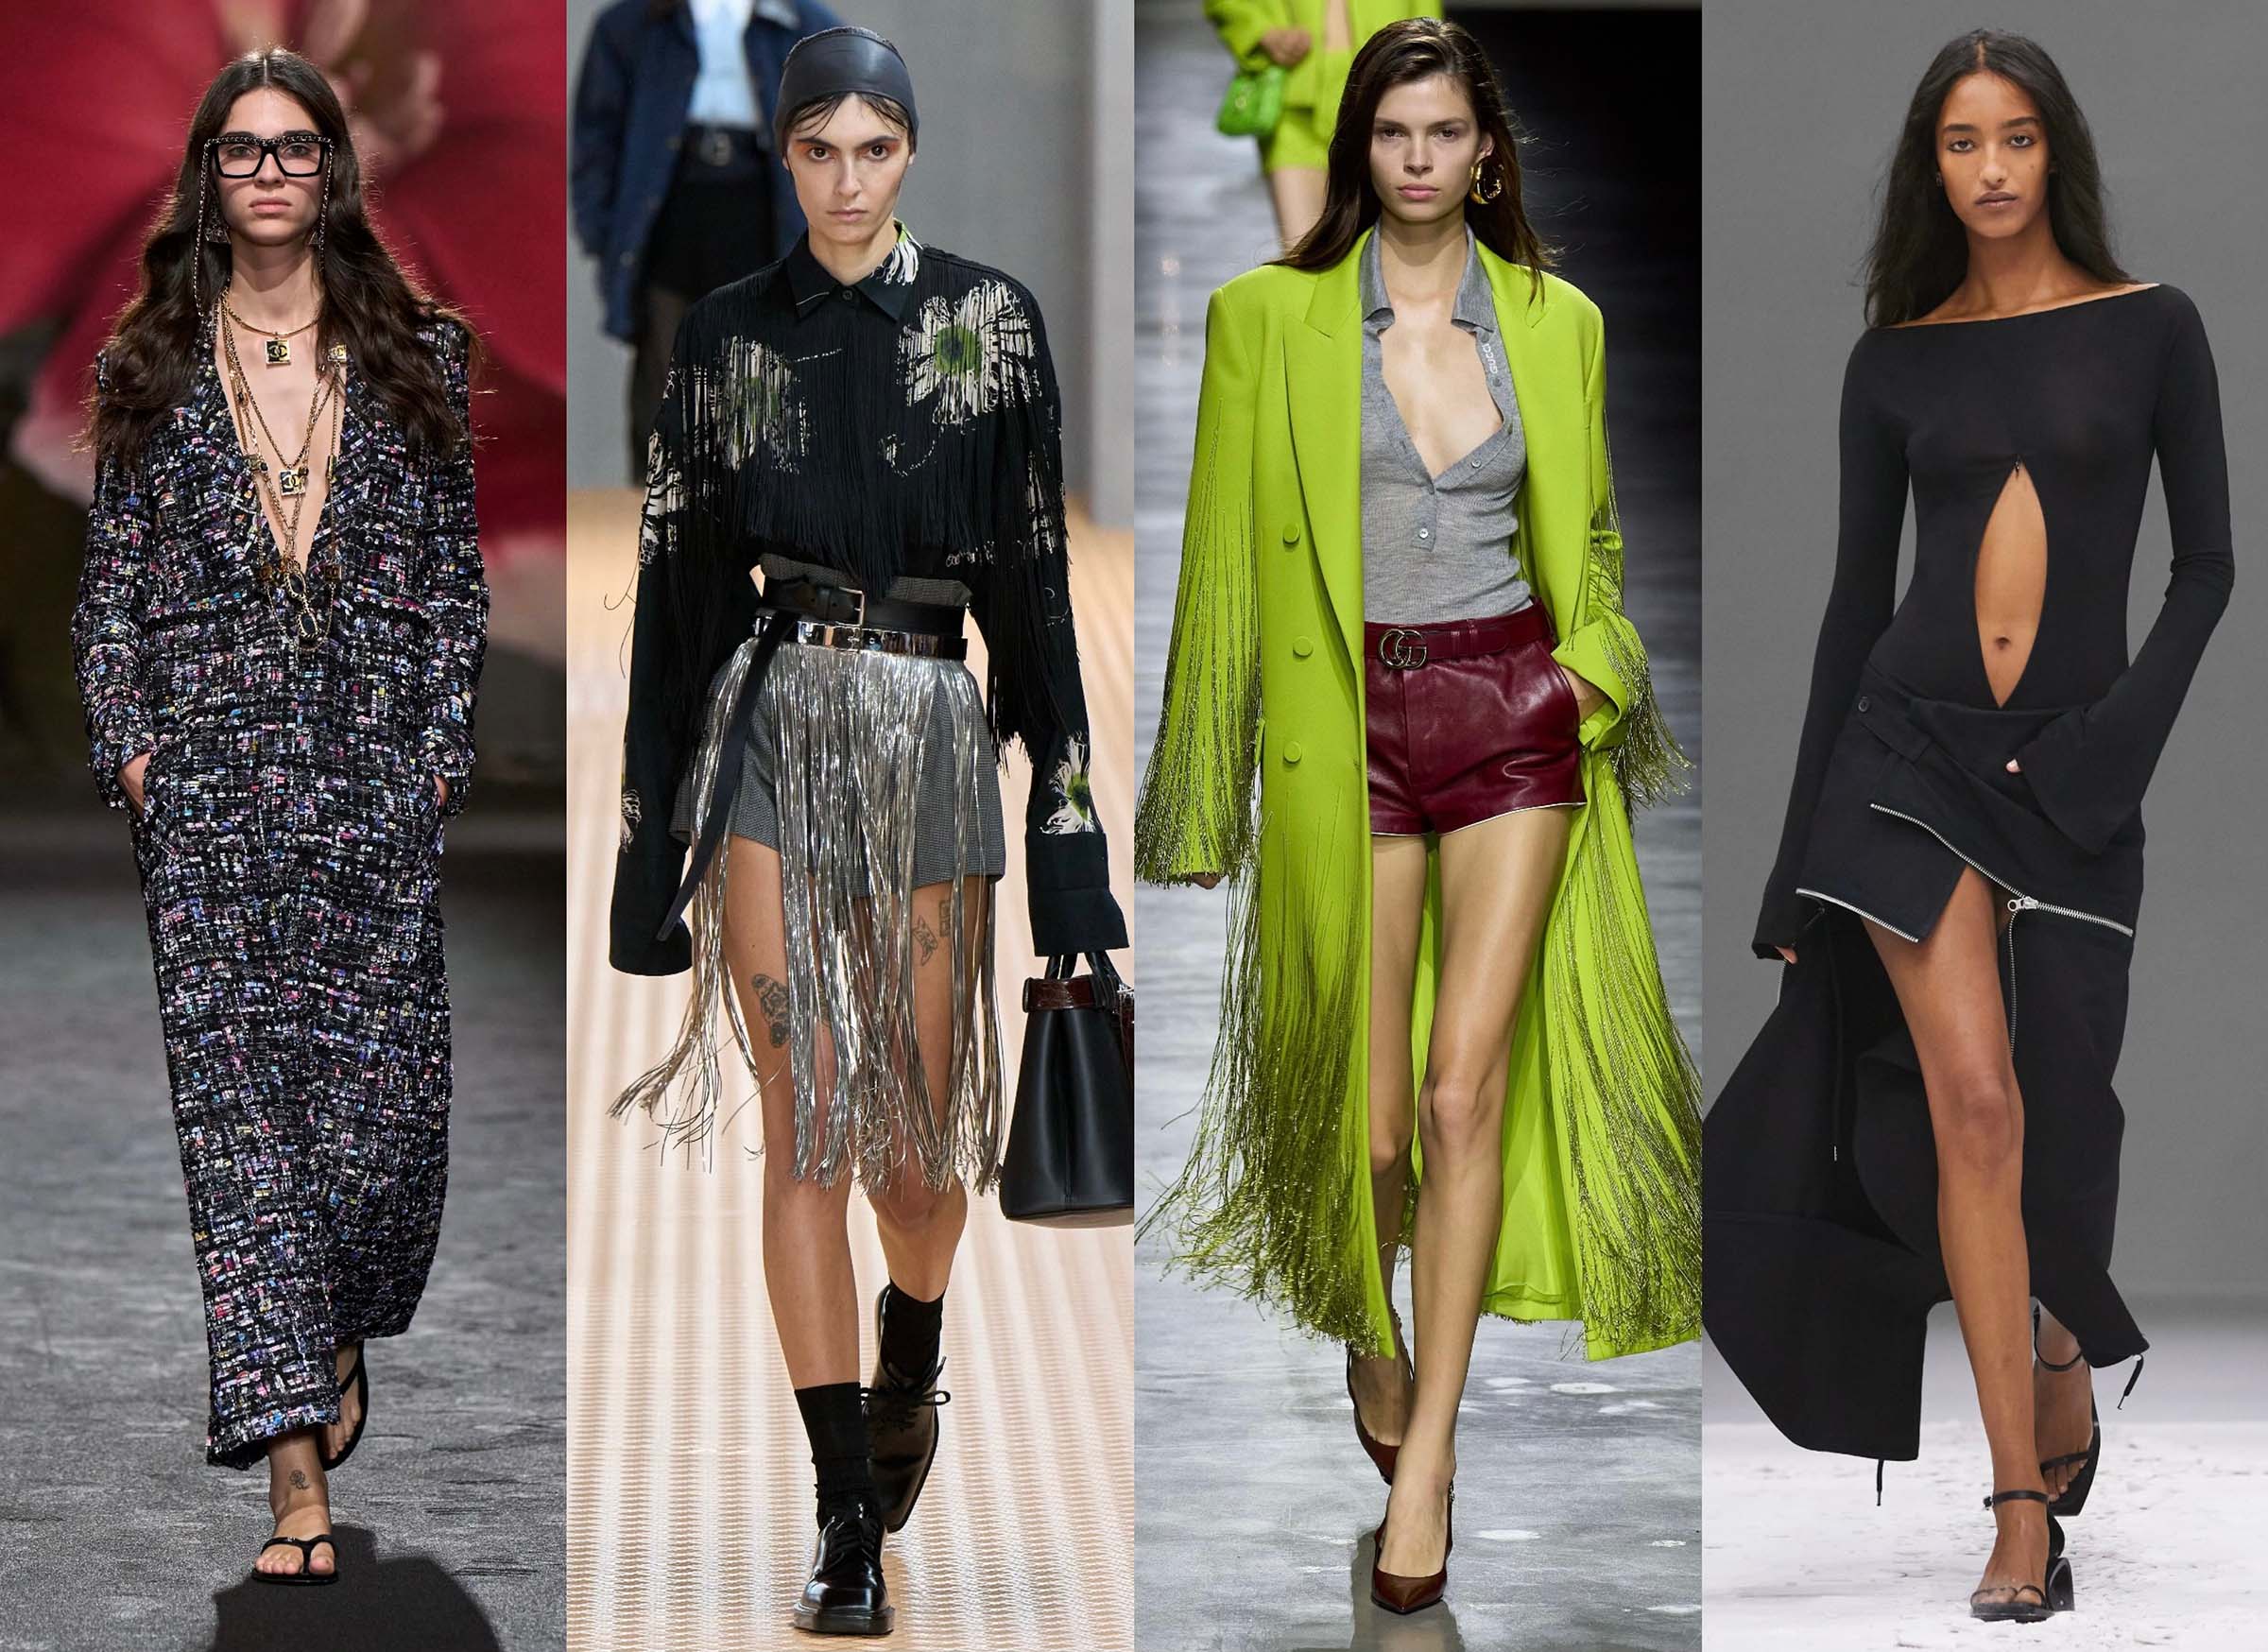 Spring fashion trend lesson: 4 ways to wear the mod look